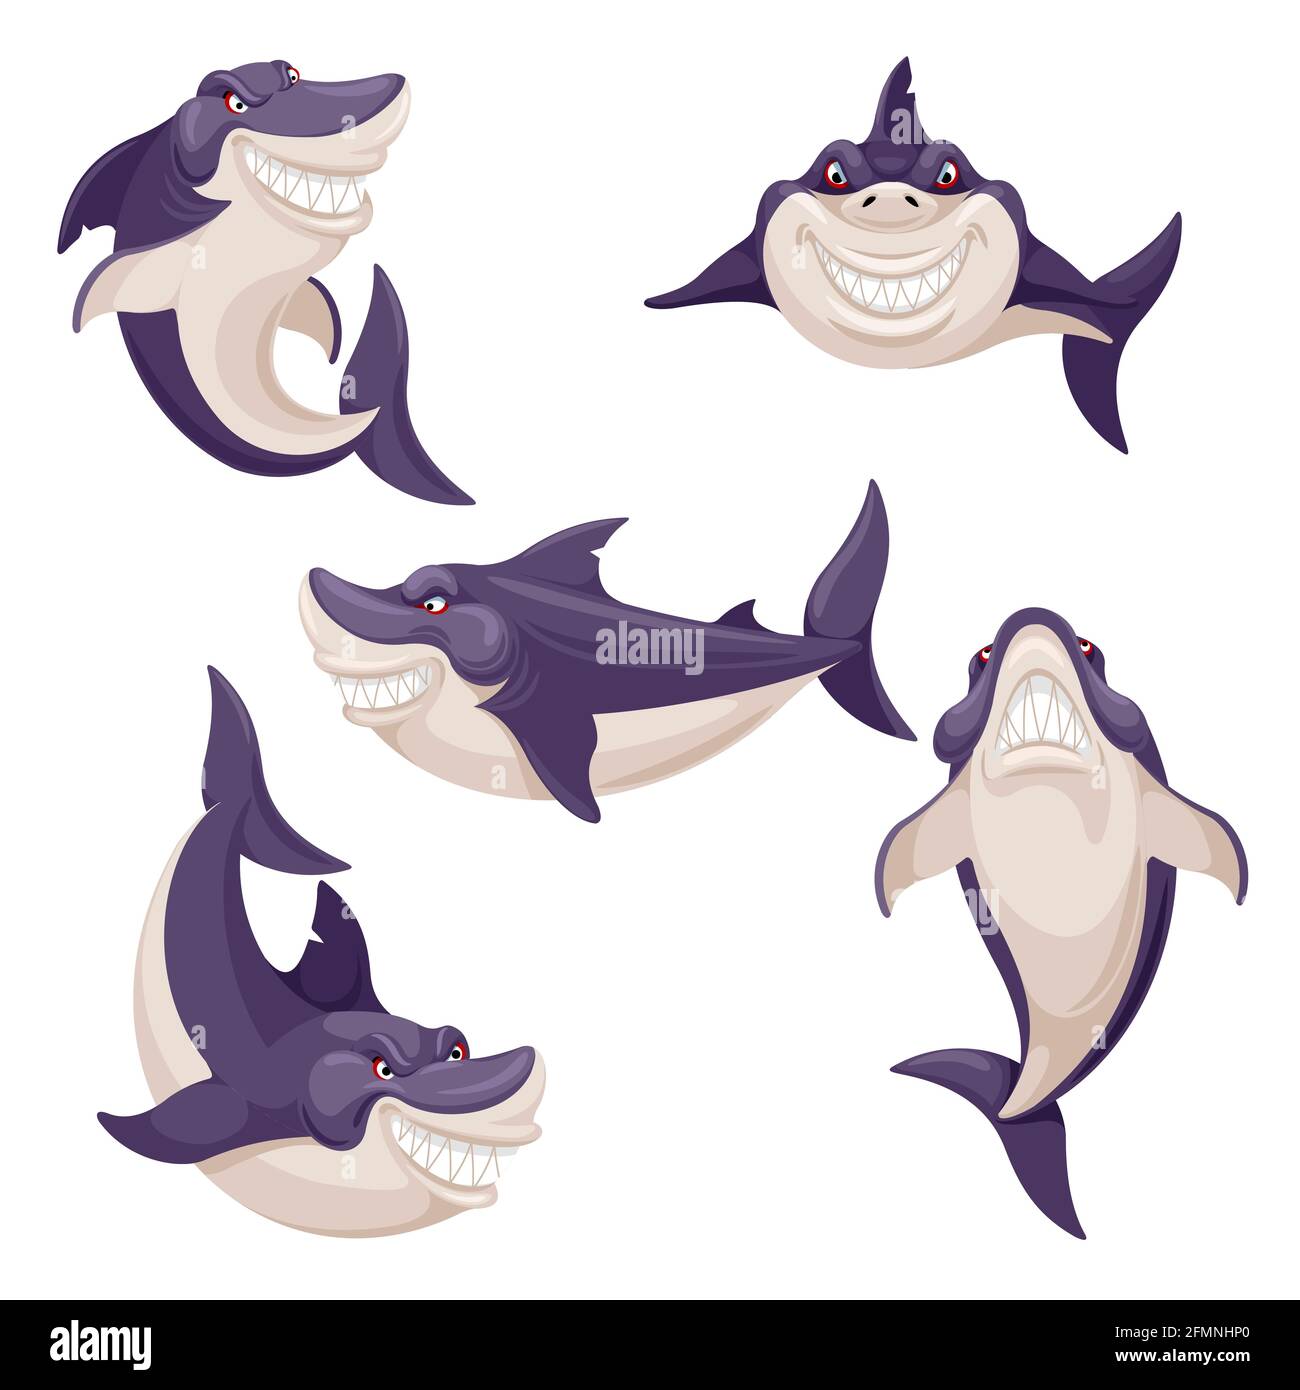 Cute shark. Dangerous fish, ocean creature predator. Swimming smiling sharks mascot. Isolated vector characters. Underwater animals with tooth, fauna creatures swimming in various positions Stock Vector